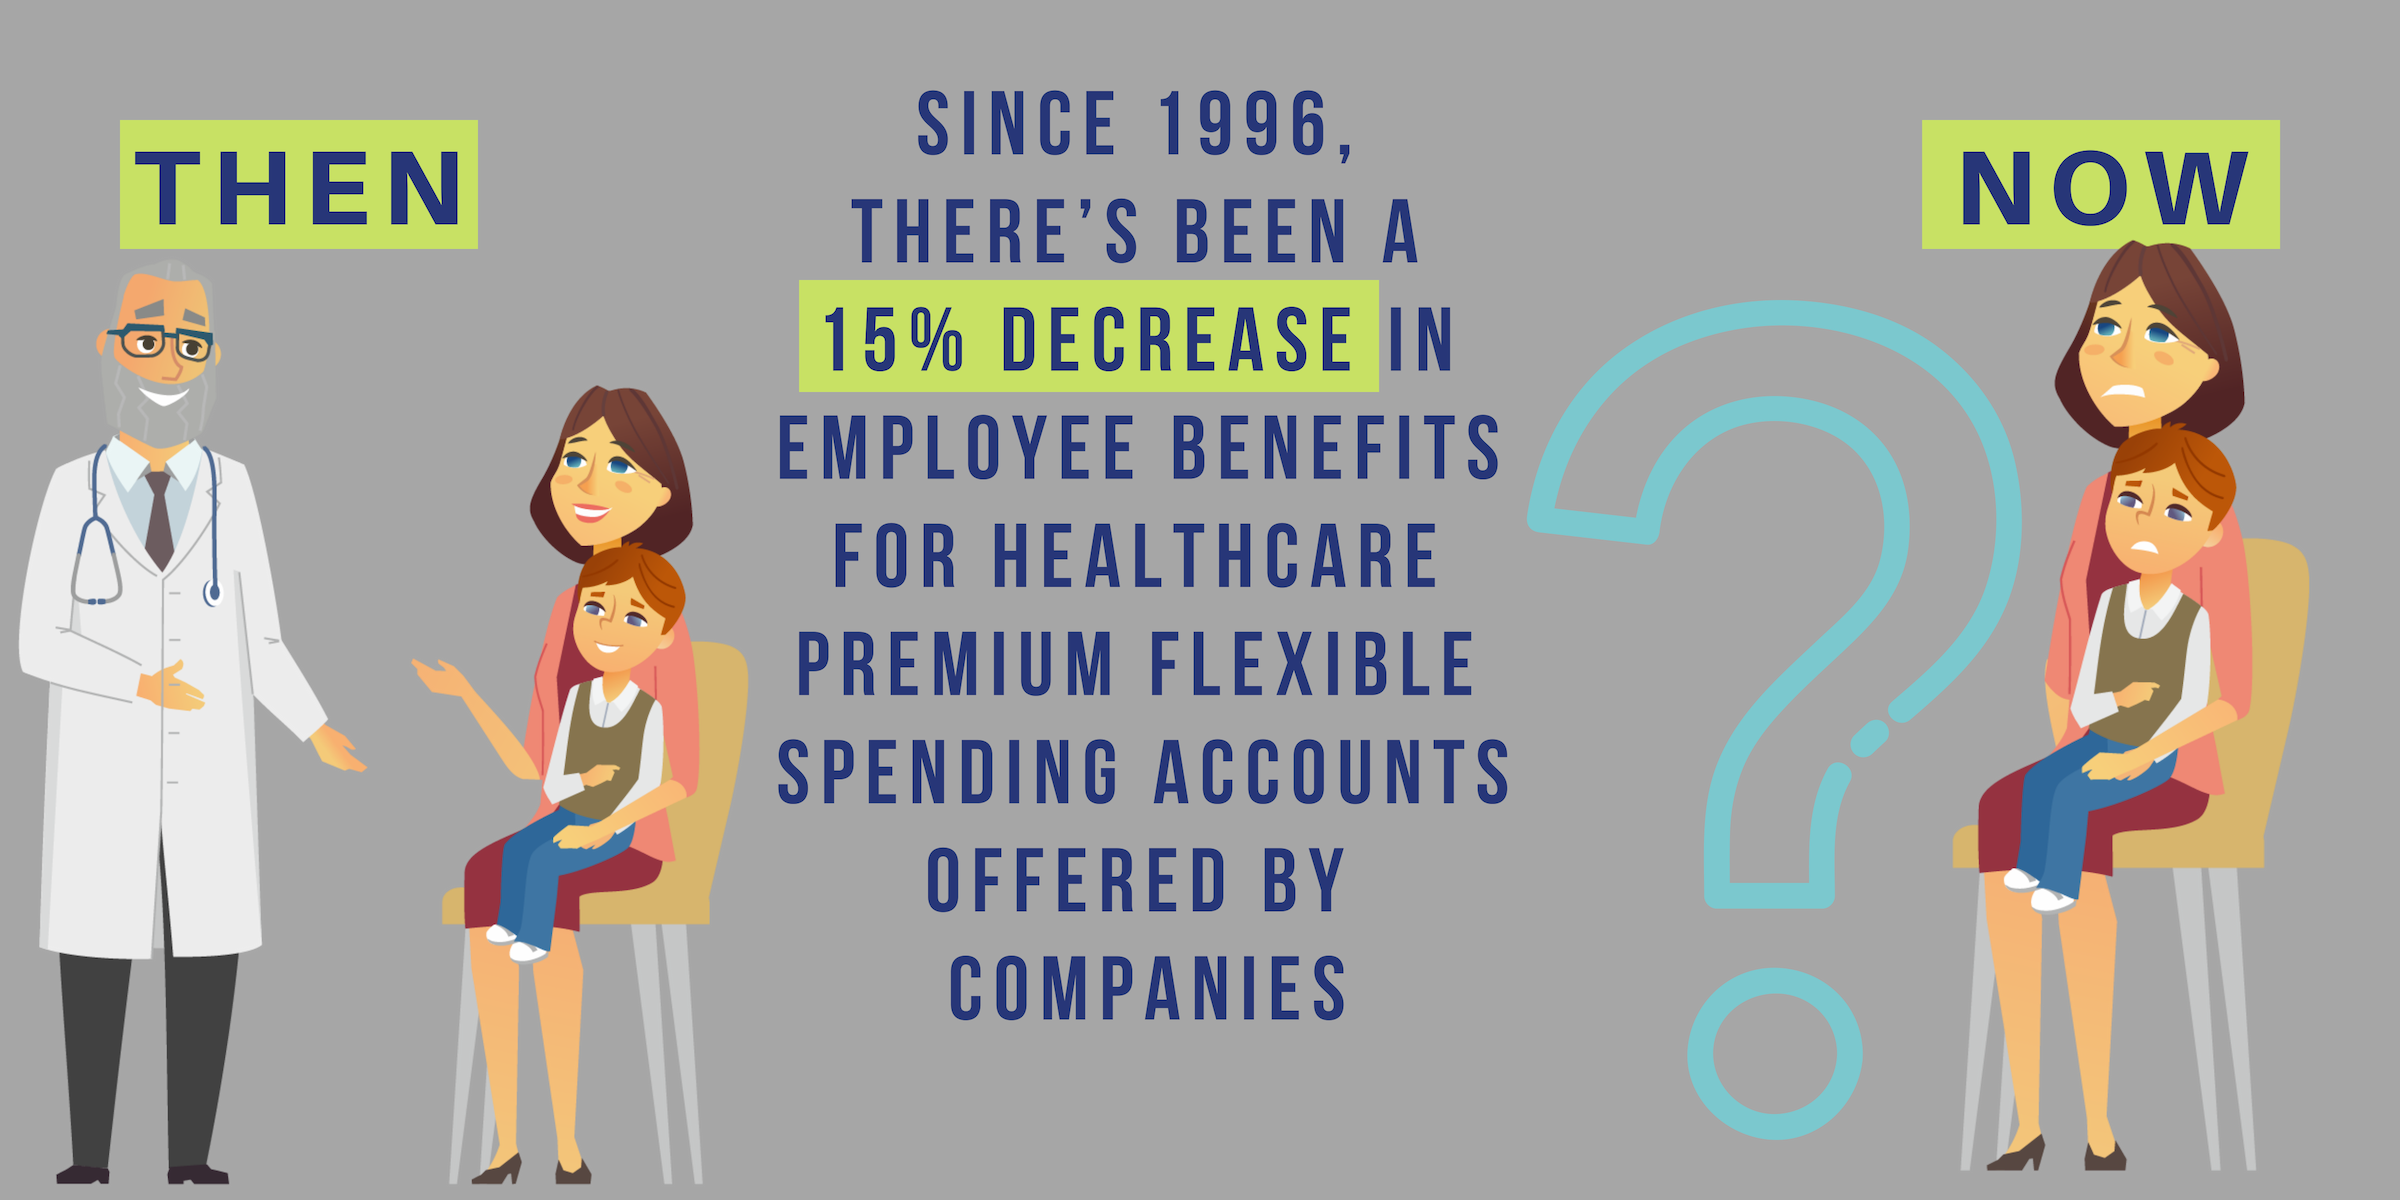 Since 1996, there's been a 15% decrease in employee benefits for healthcare premium flexible spending accounts offered by companies